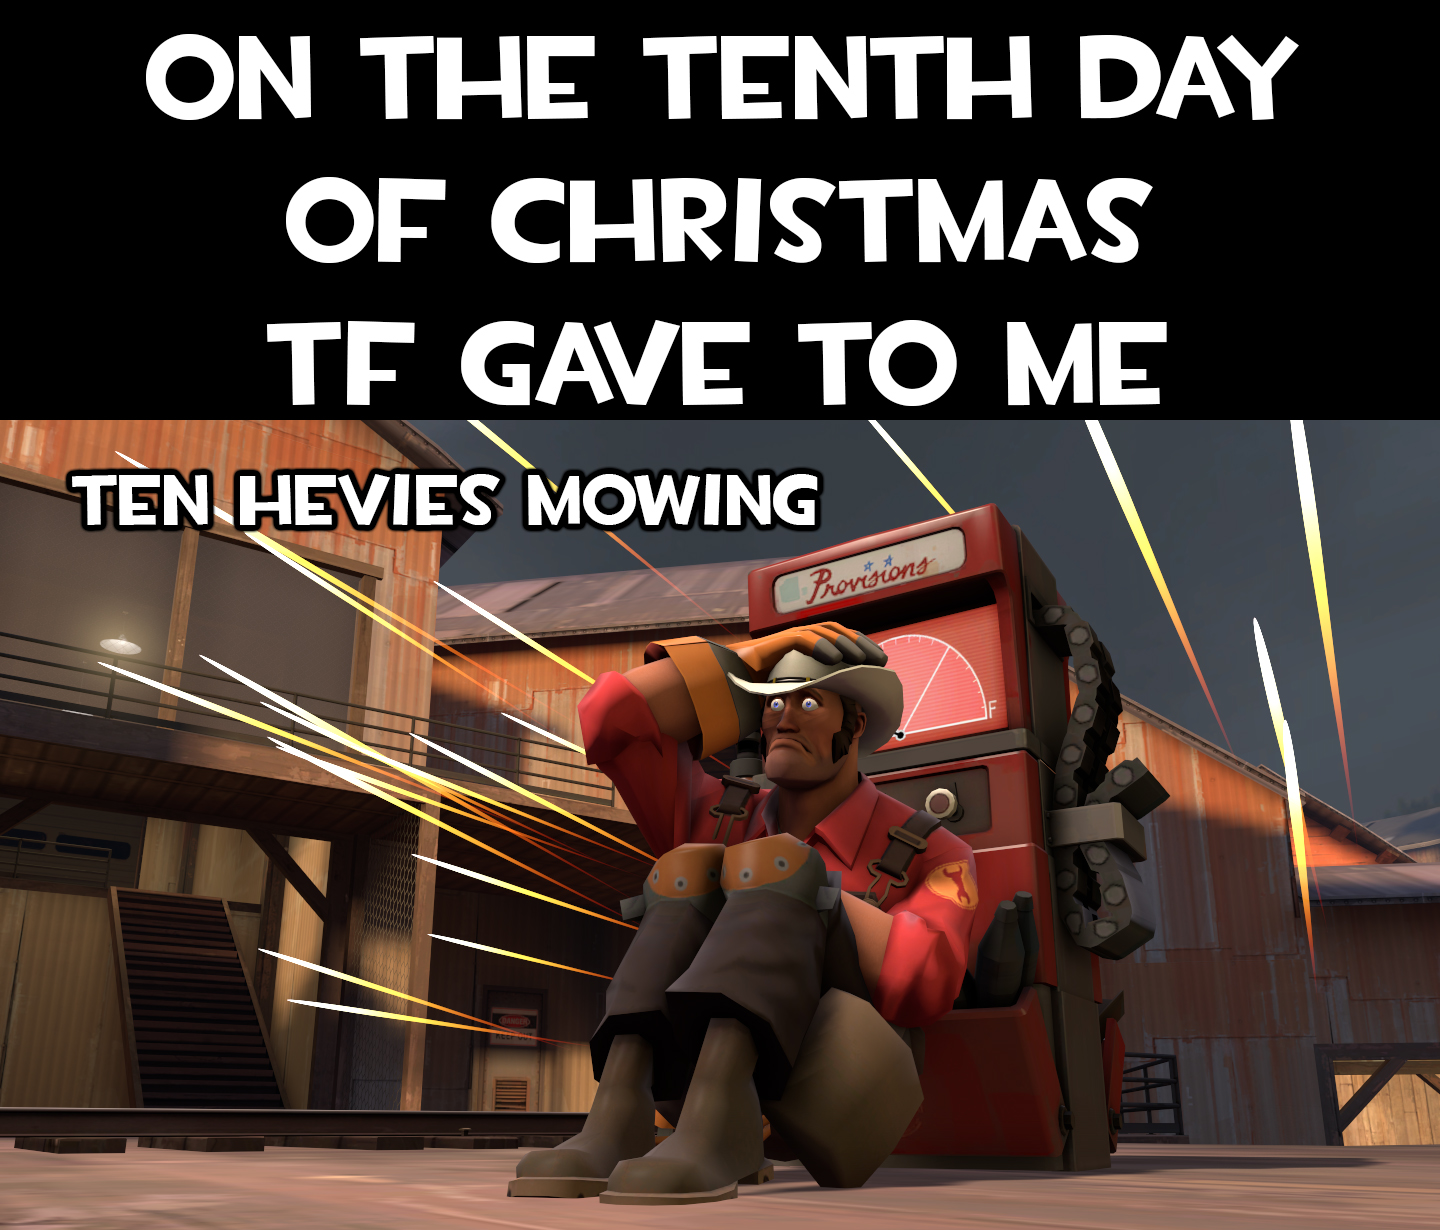 Tenth day of christmas